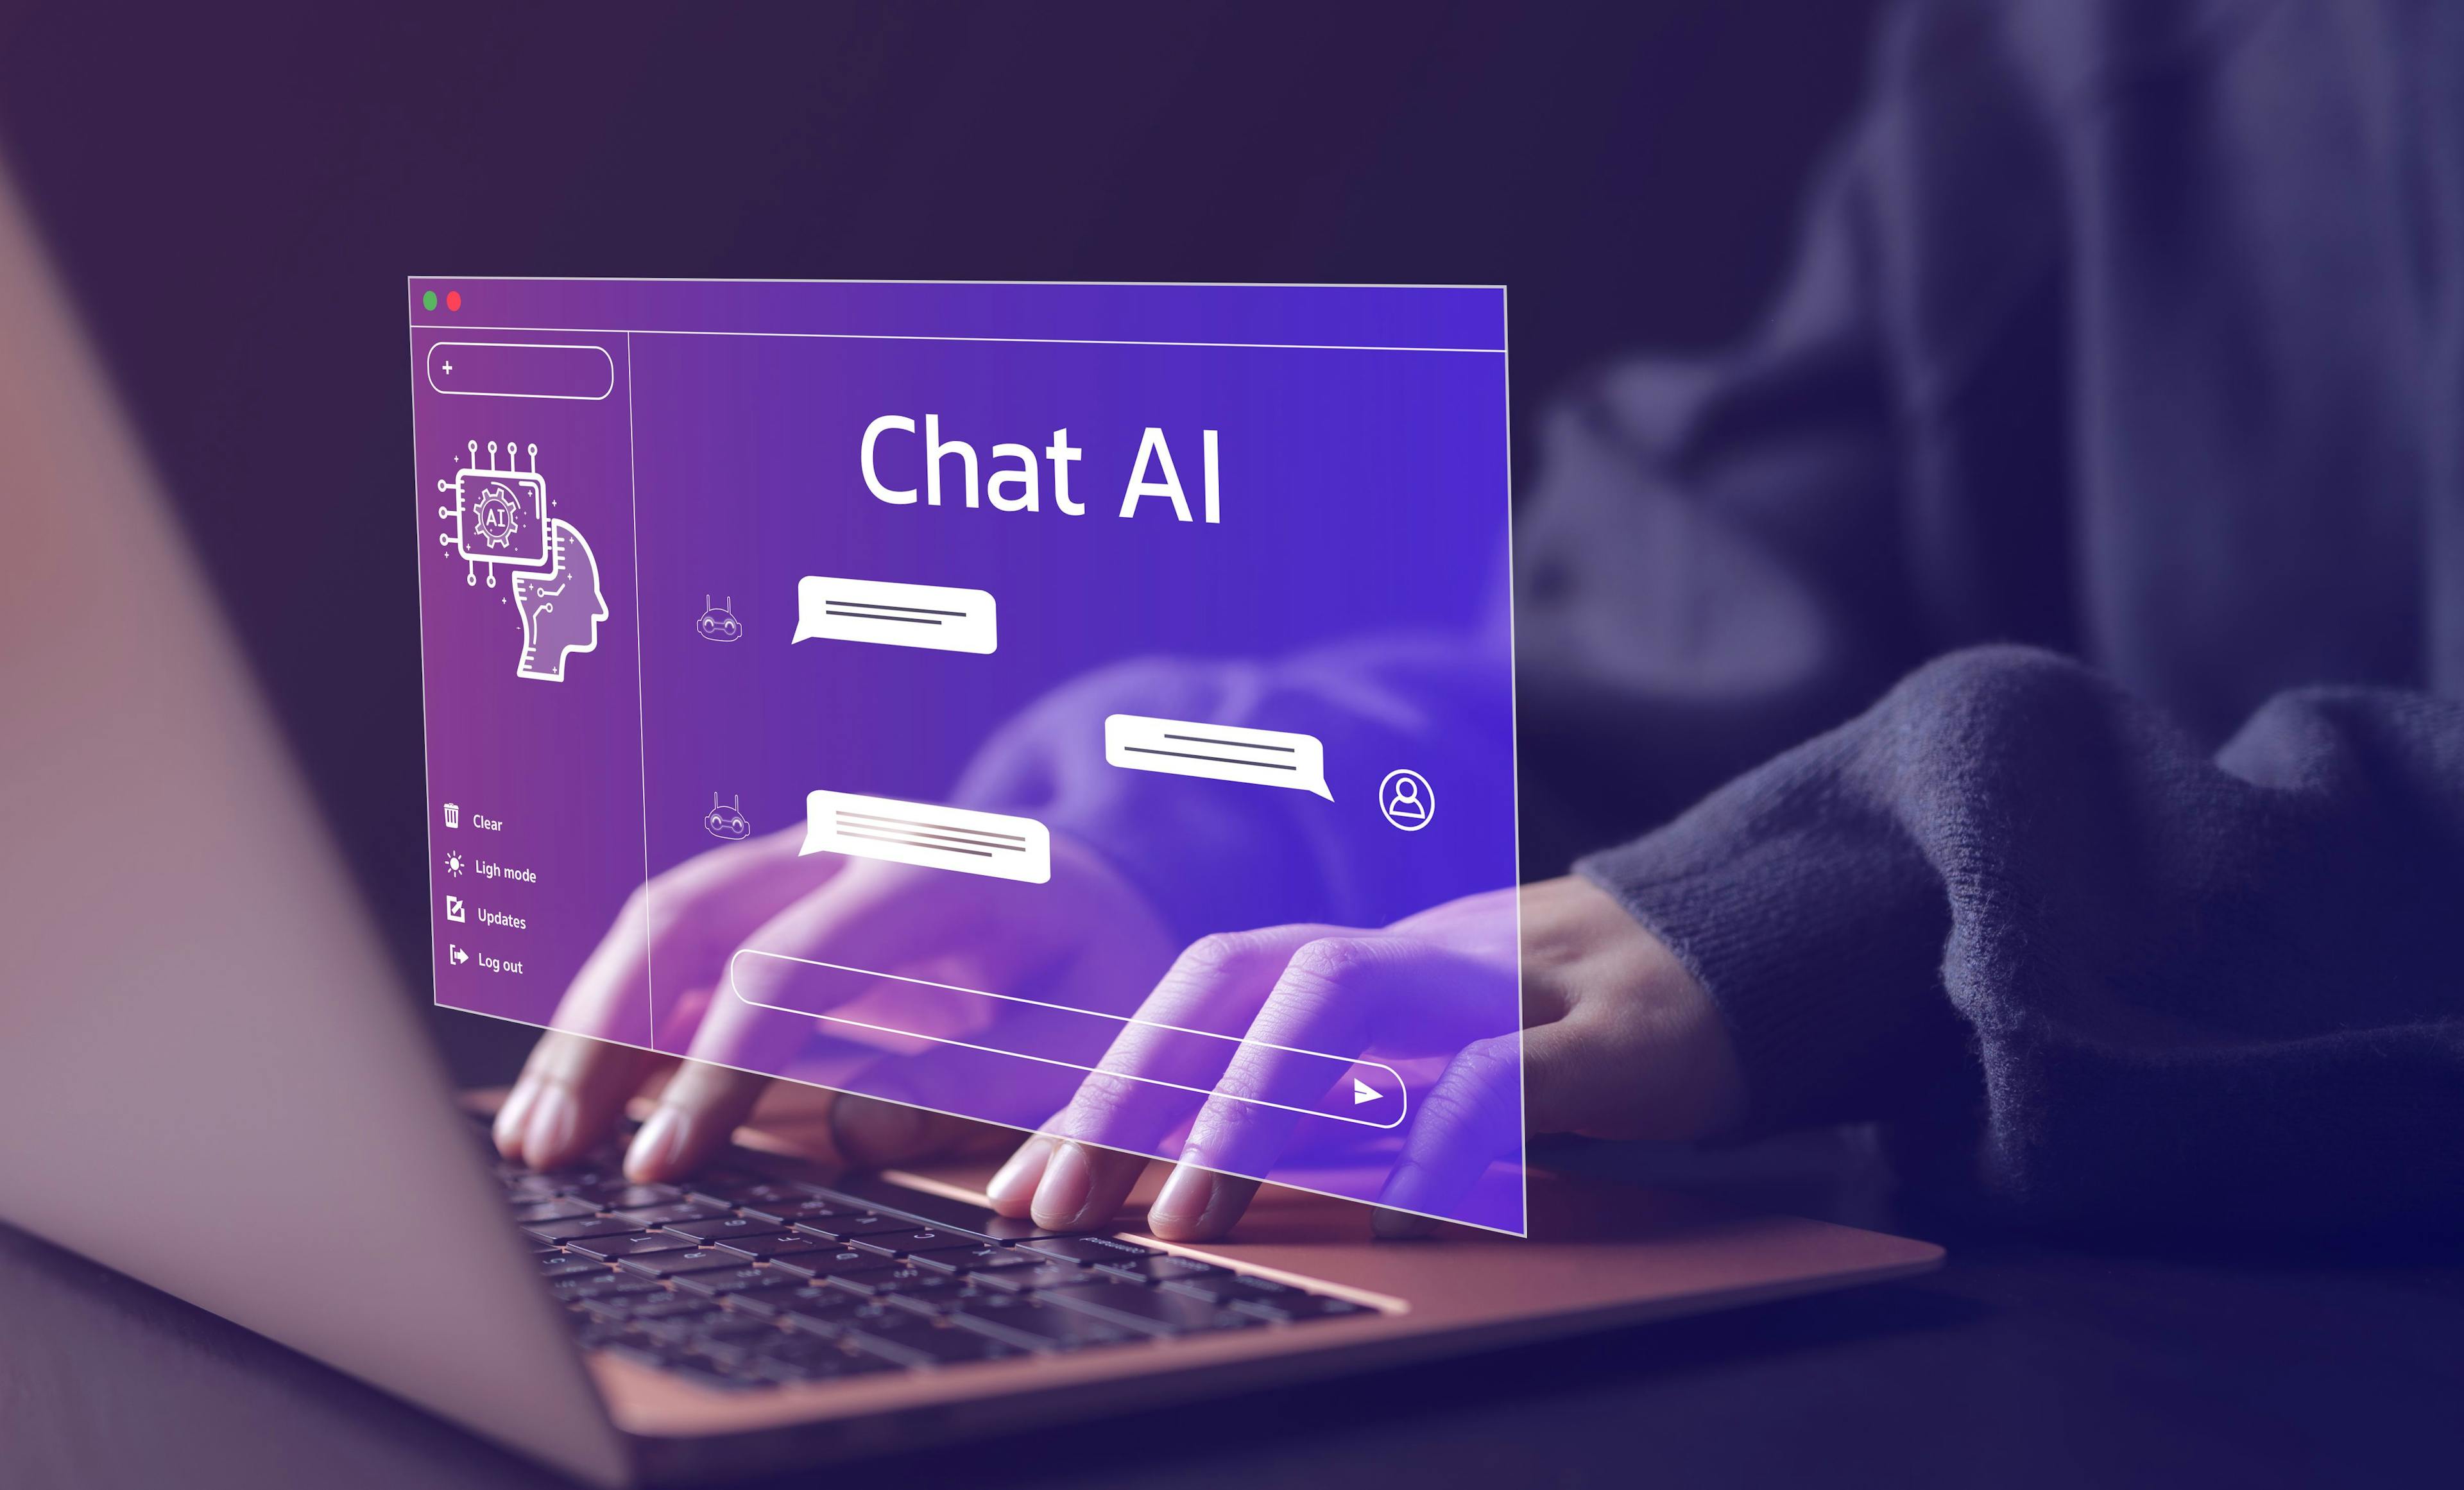 Person interacting with Chat AI | Image Credit: © Supatman - stock.adobe.com.